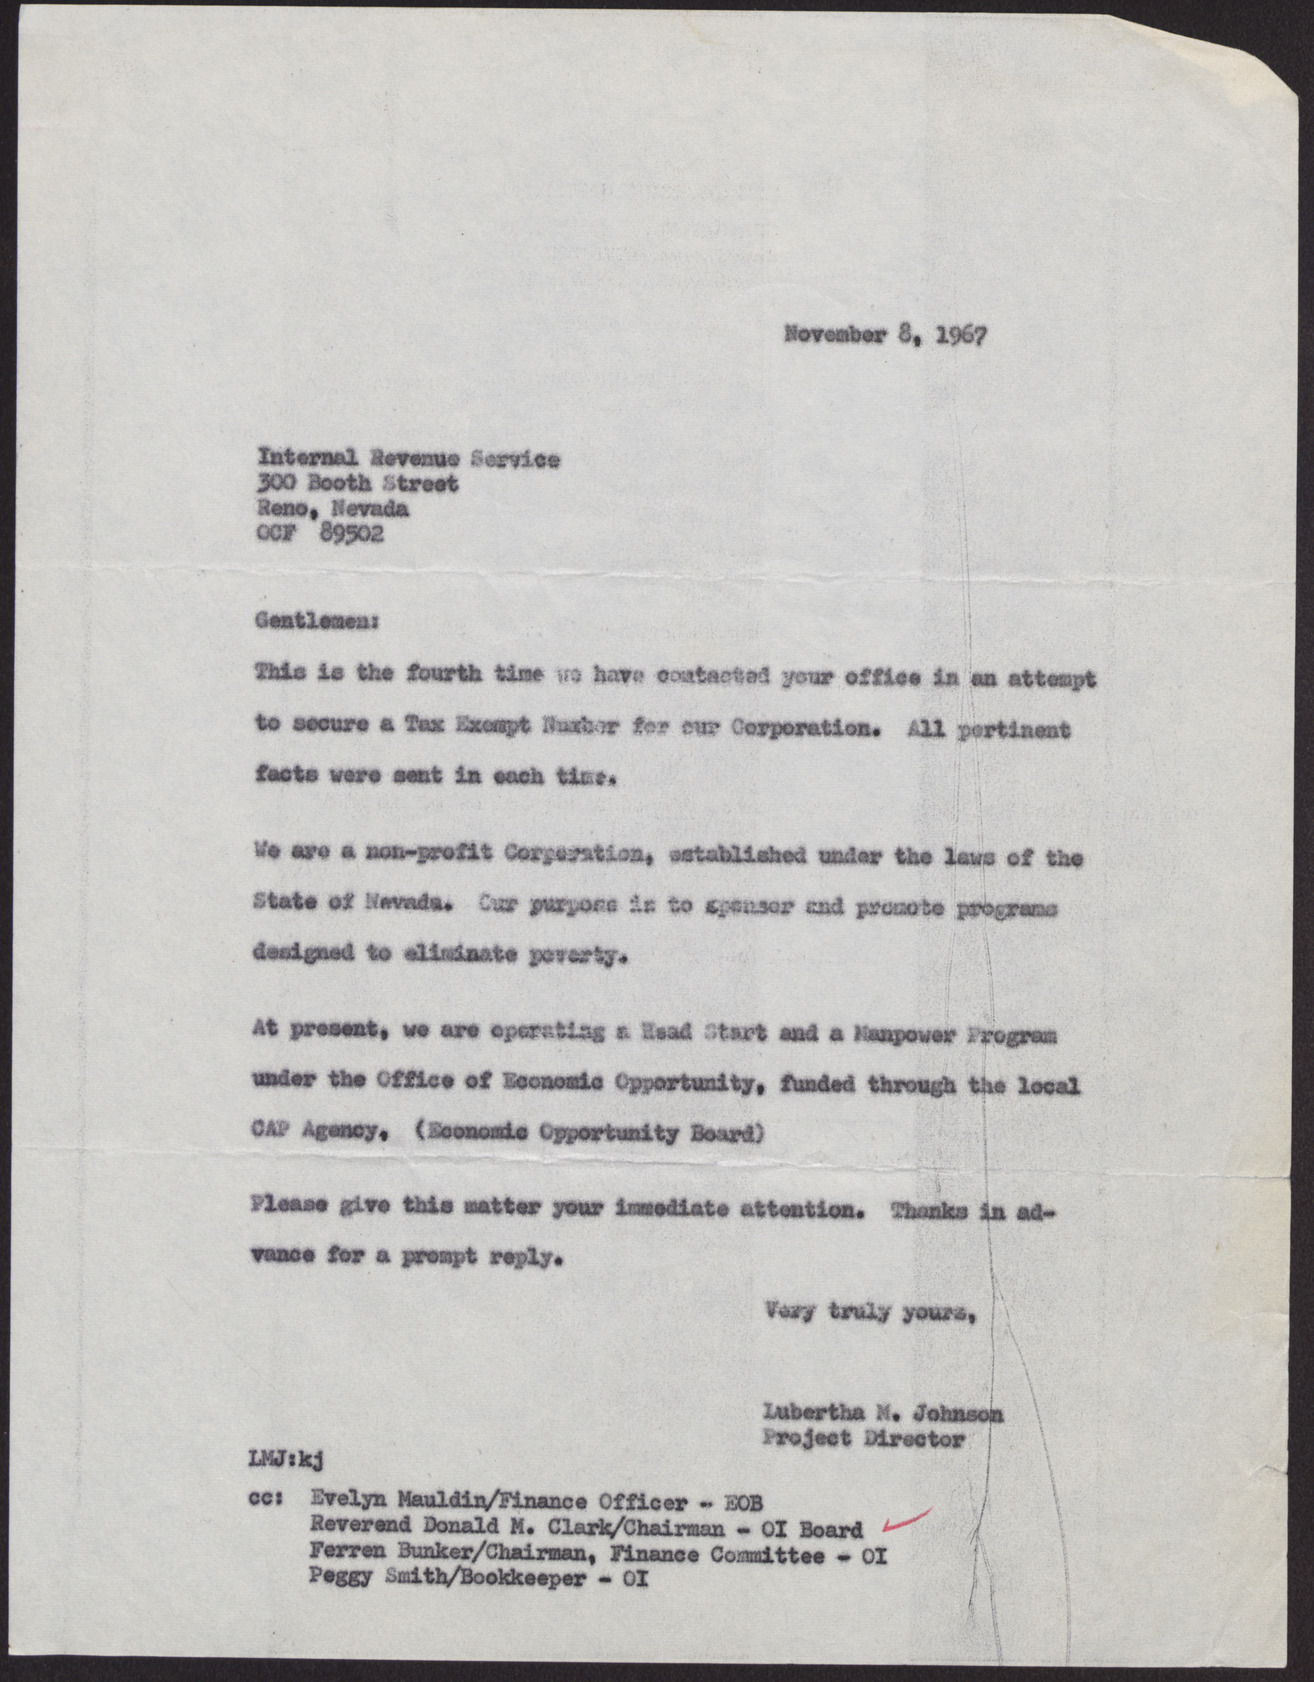 Letter to the Internal Revenue Service from the EOB, November 8, 1967